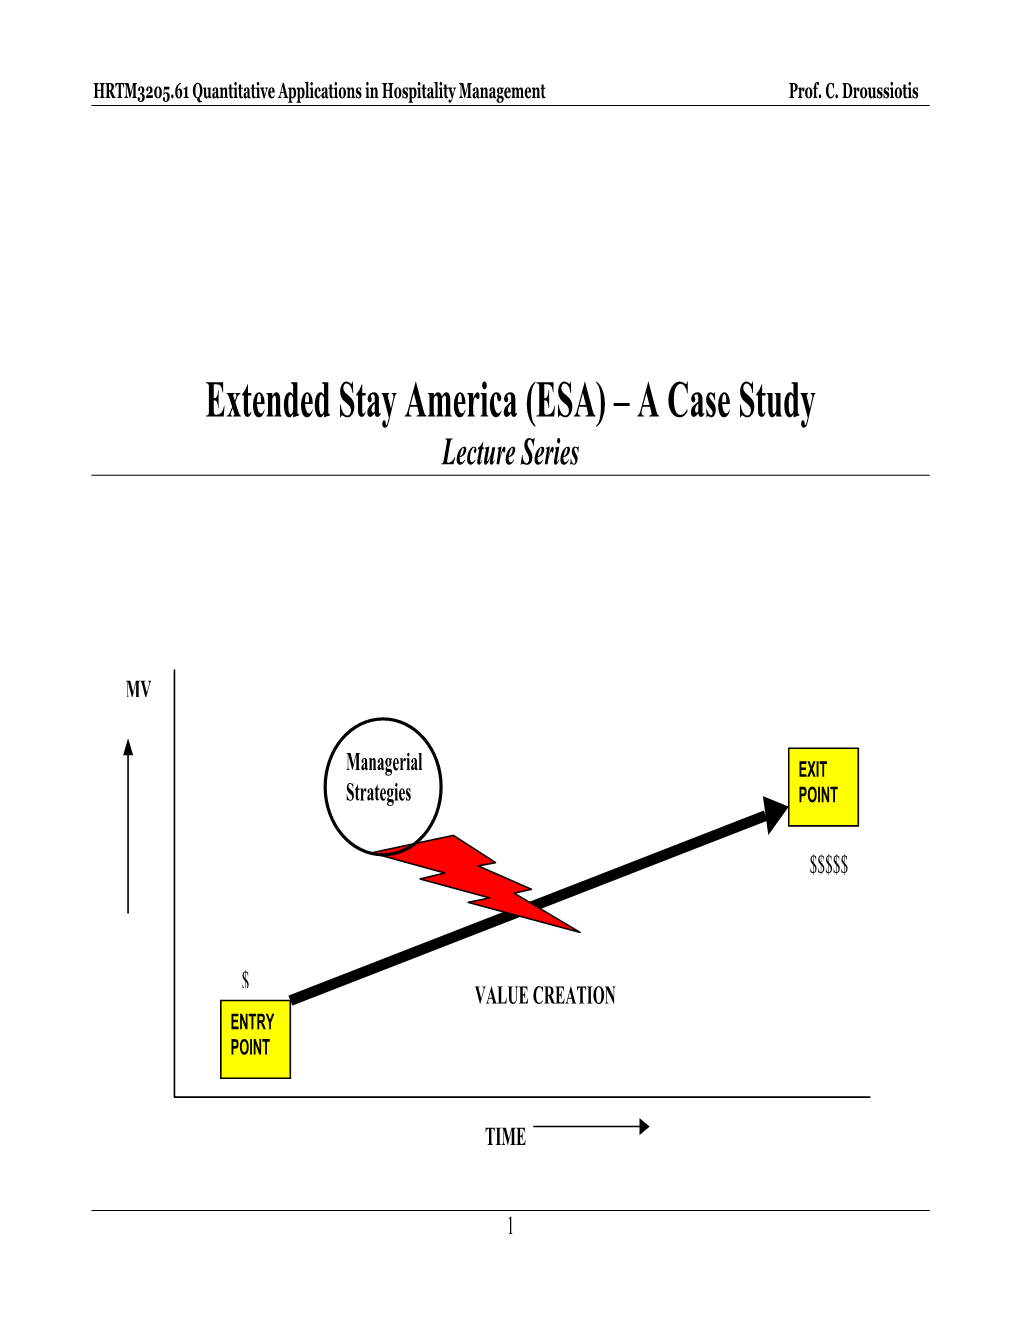 Extended Stay America (ESA) – a Case Study Lecture Series